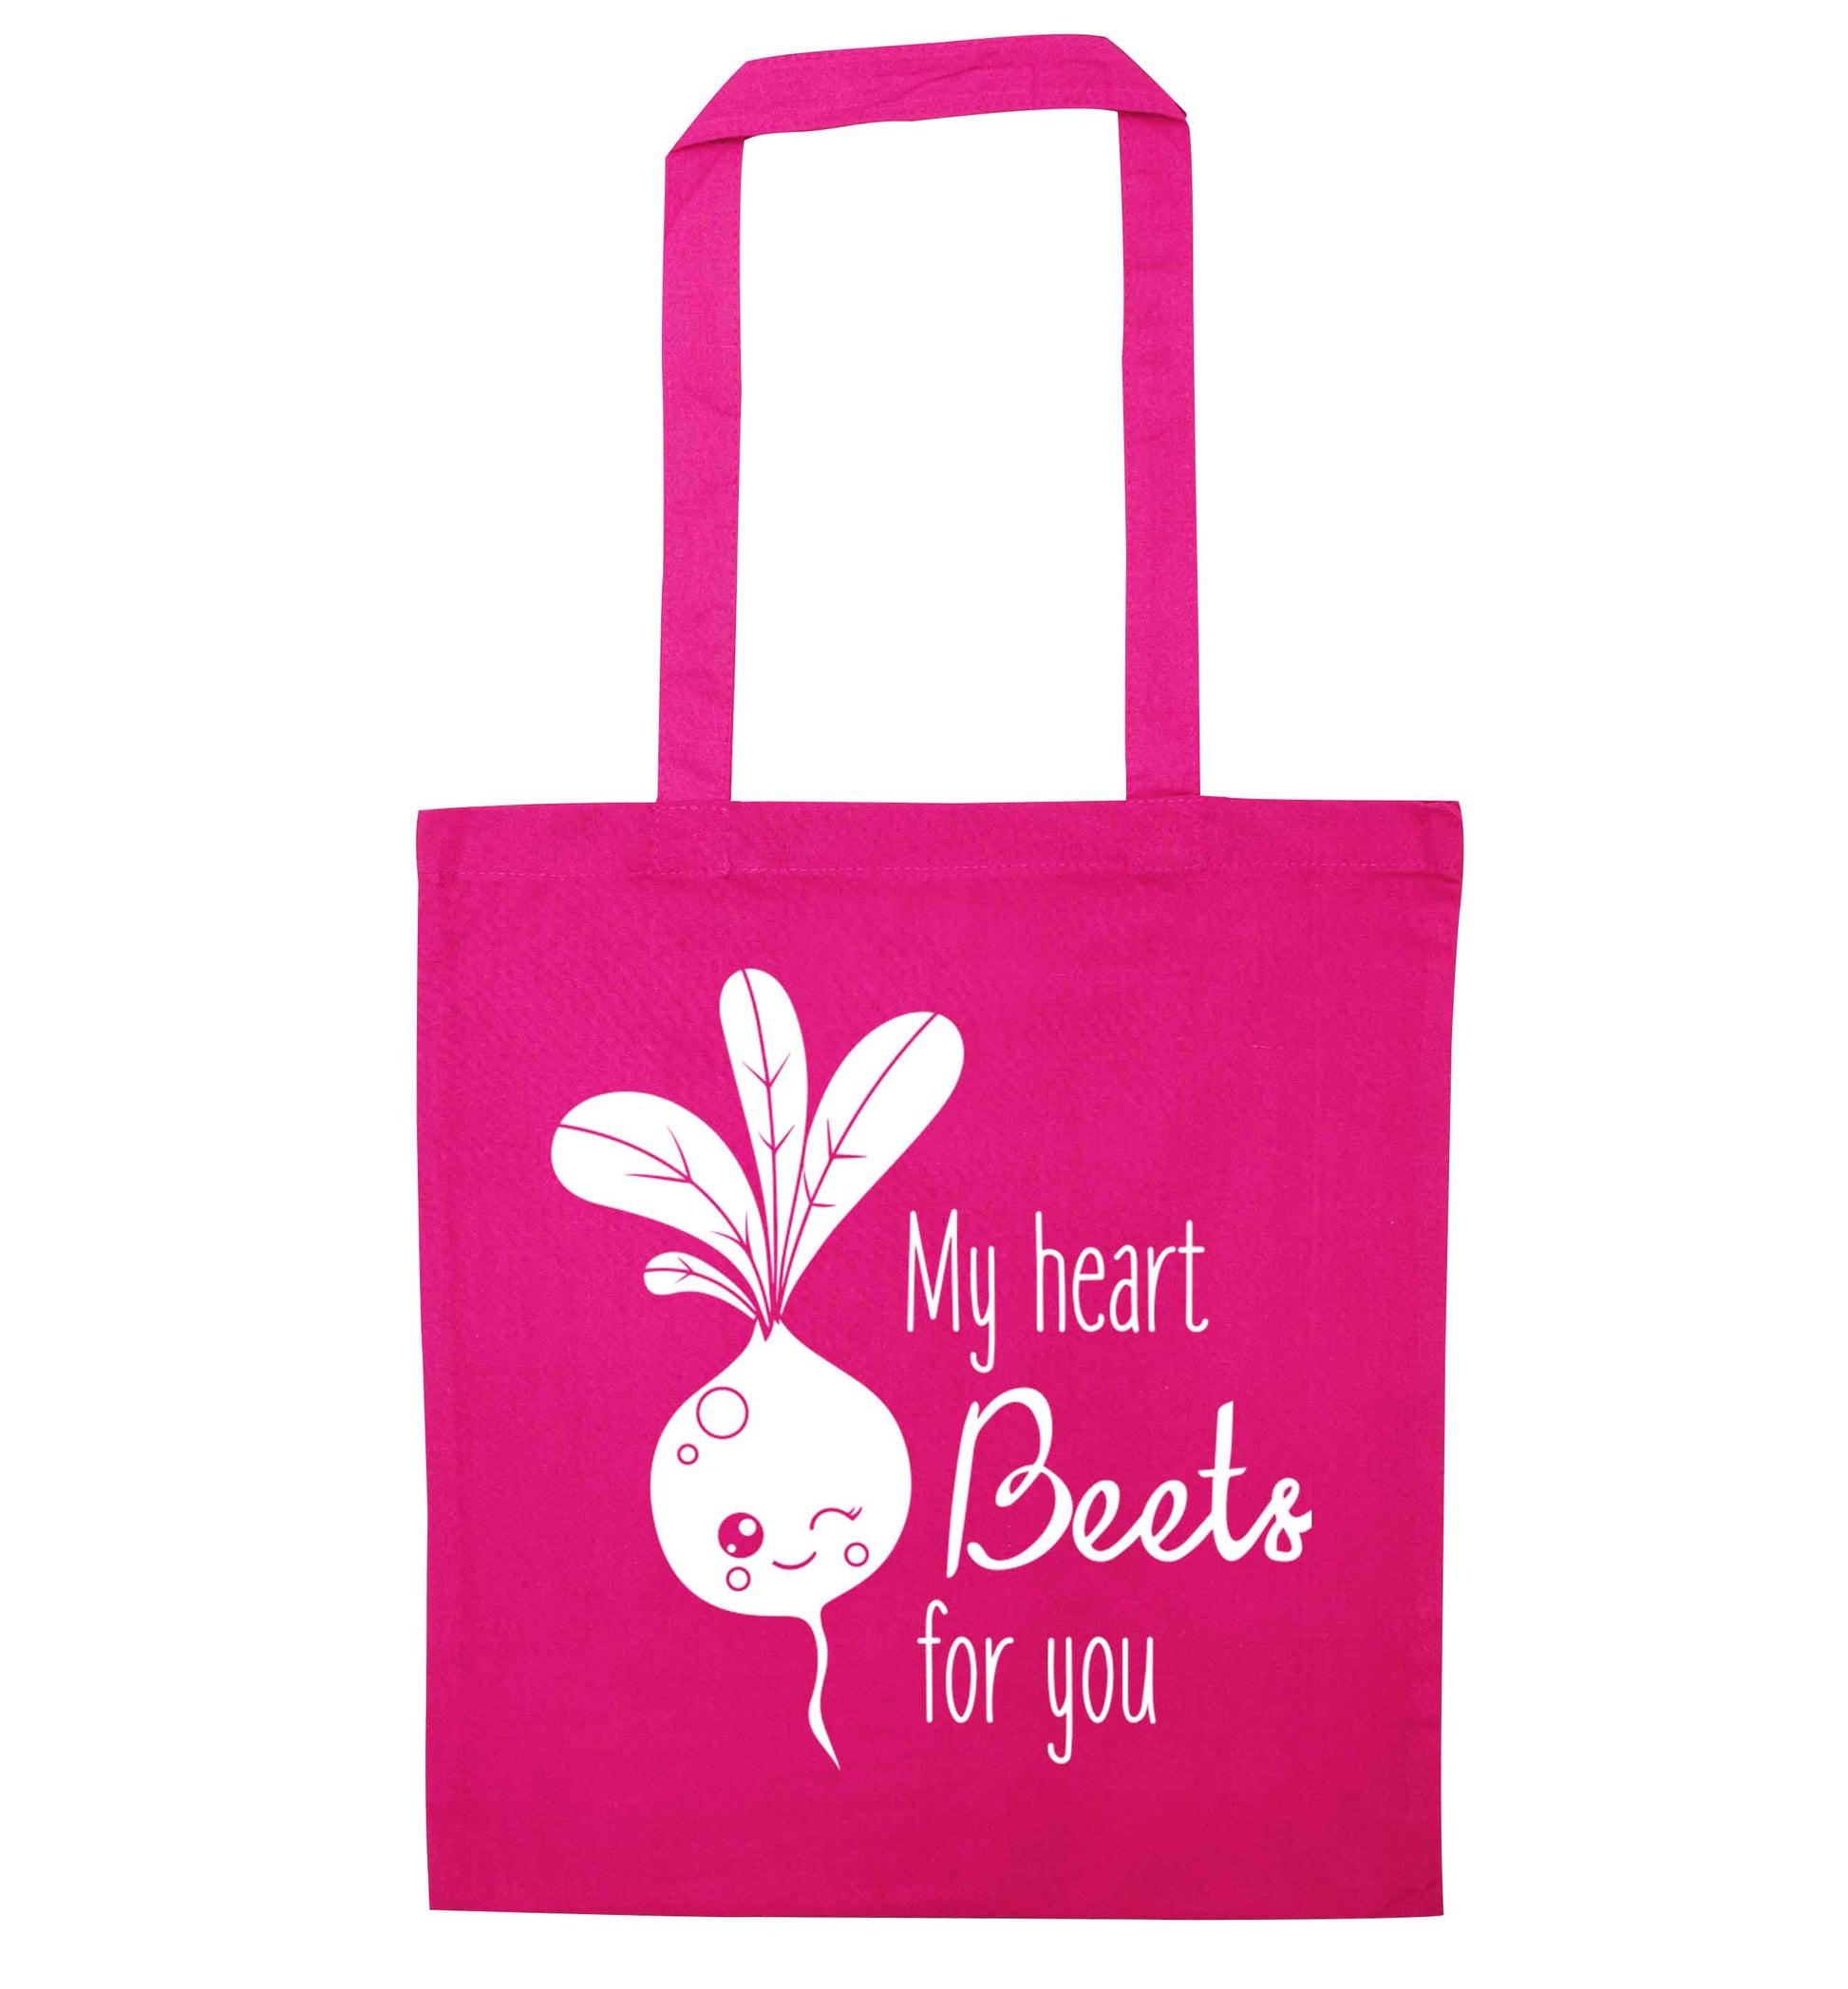 My heart beets for you pink tote bag